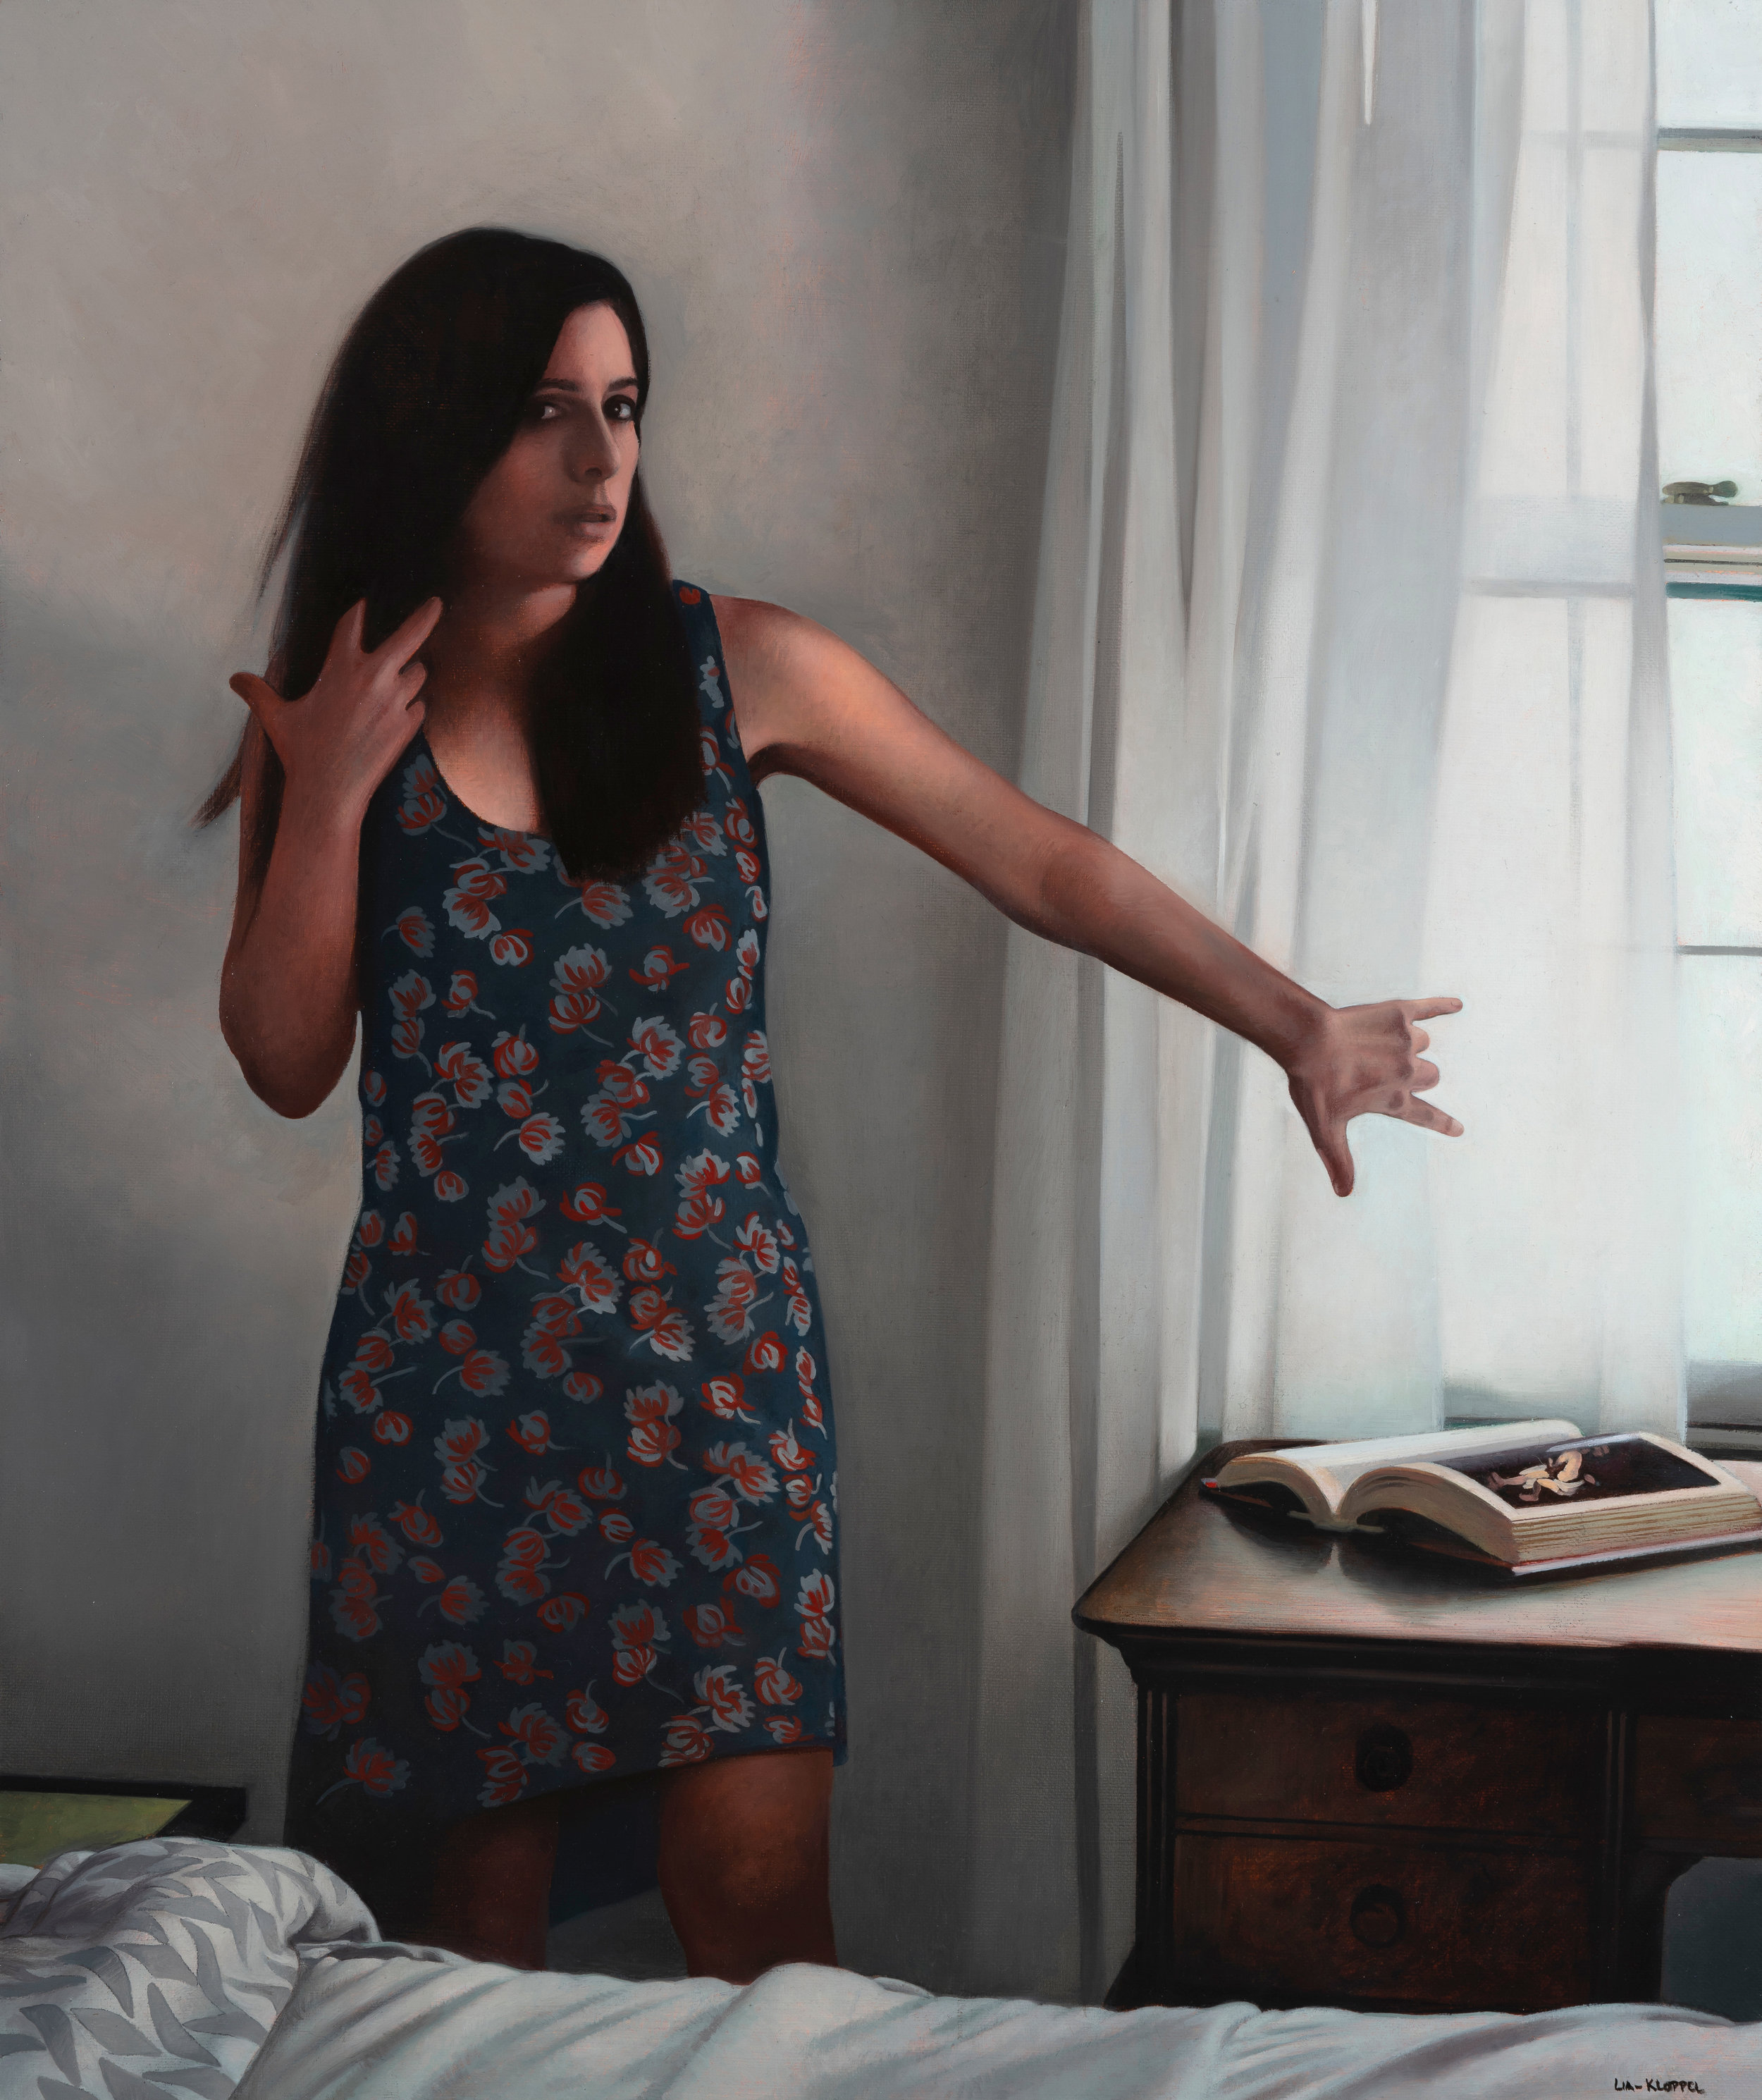   Unfurling Susanna , 2018, Oil on linen, 24 x 22 inches, Private collection 